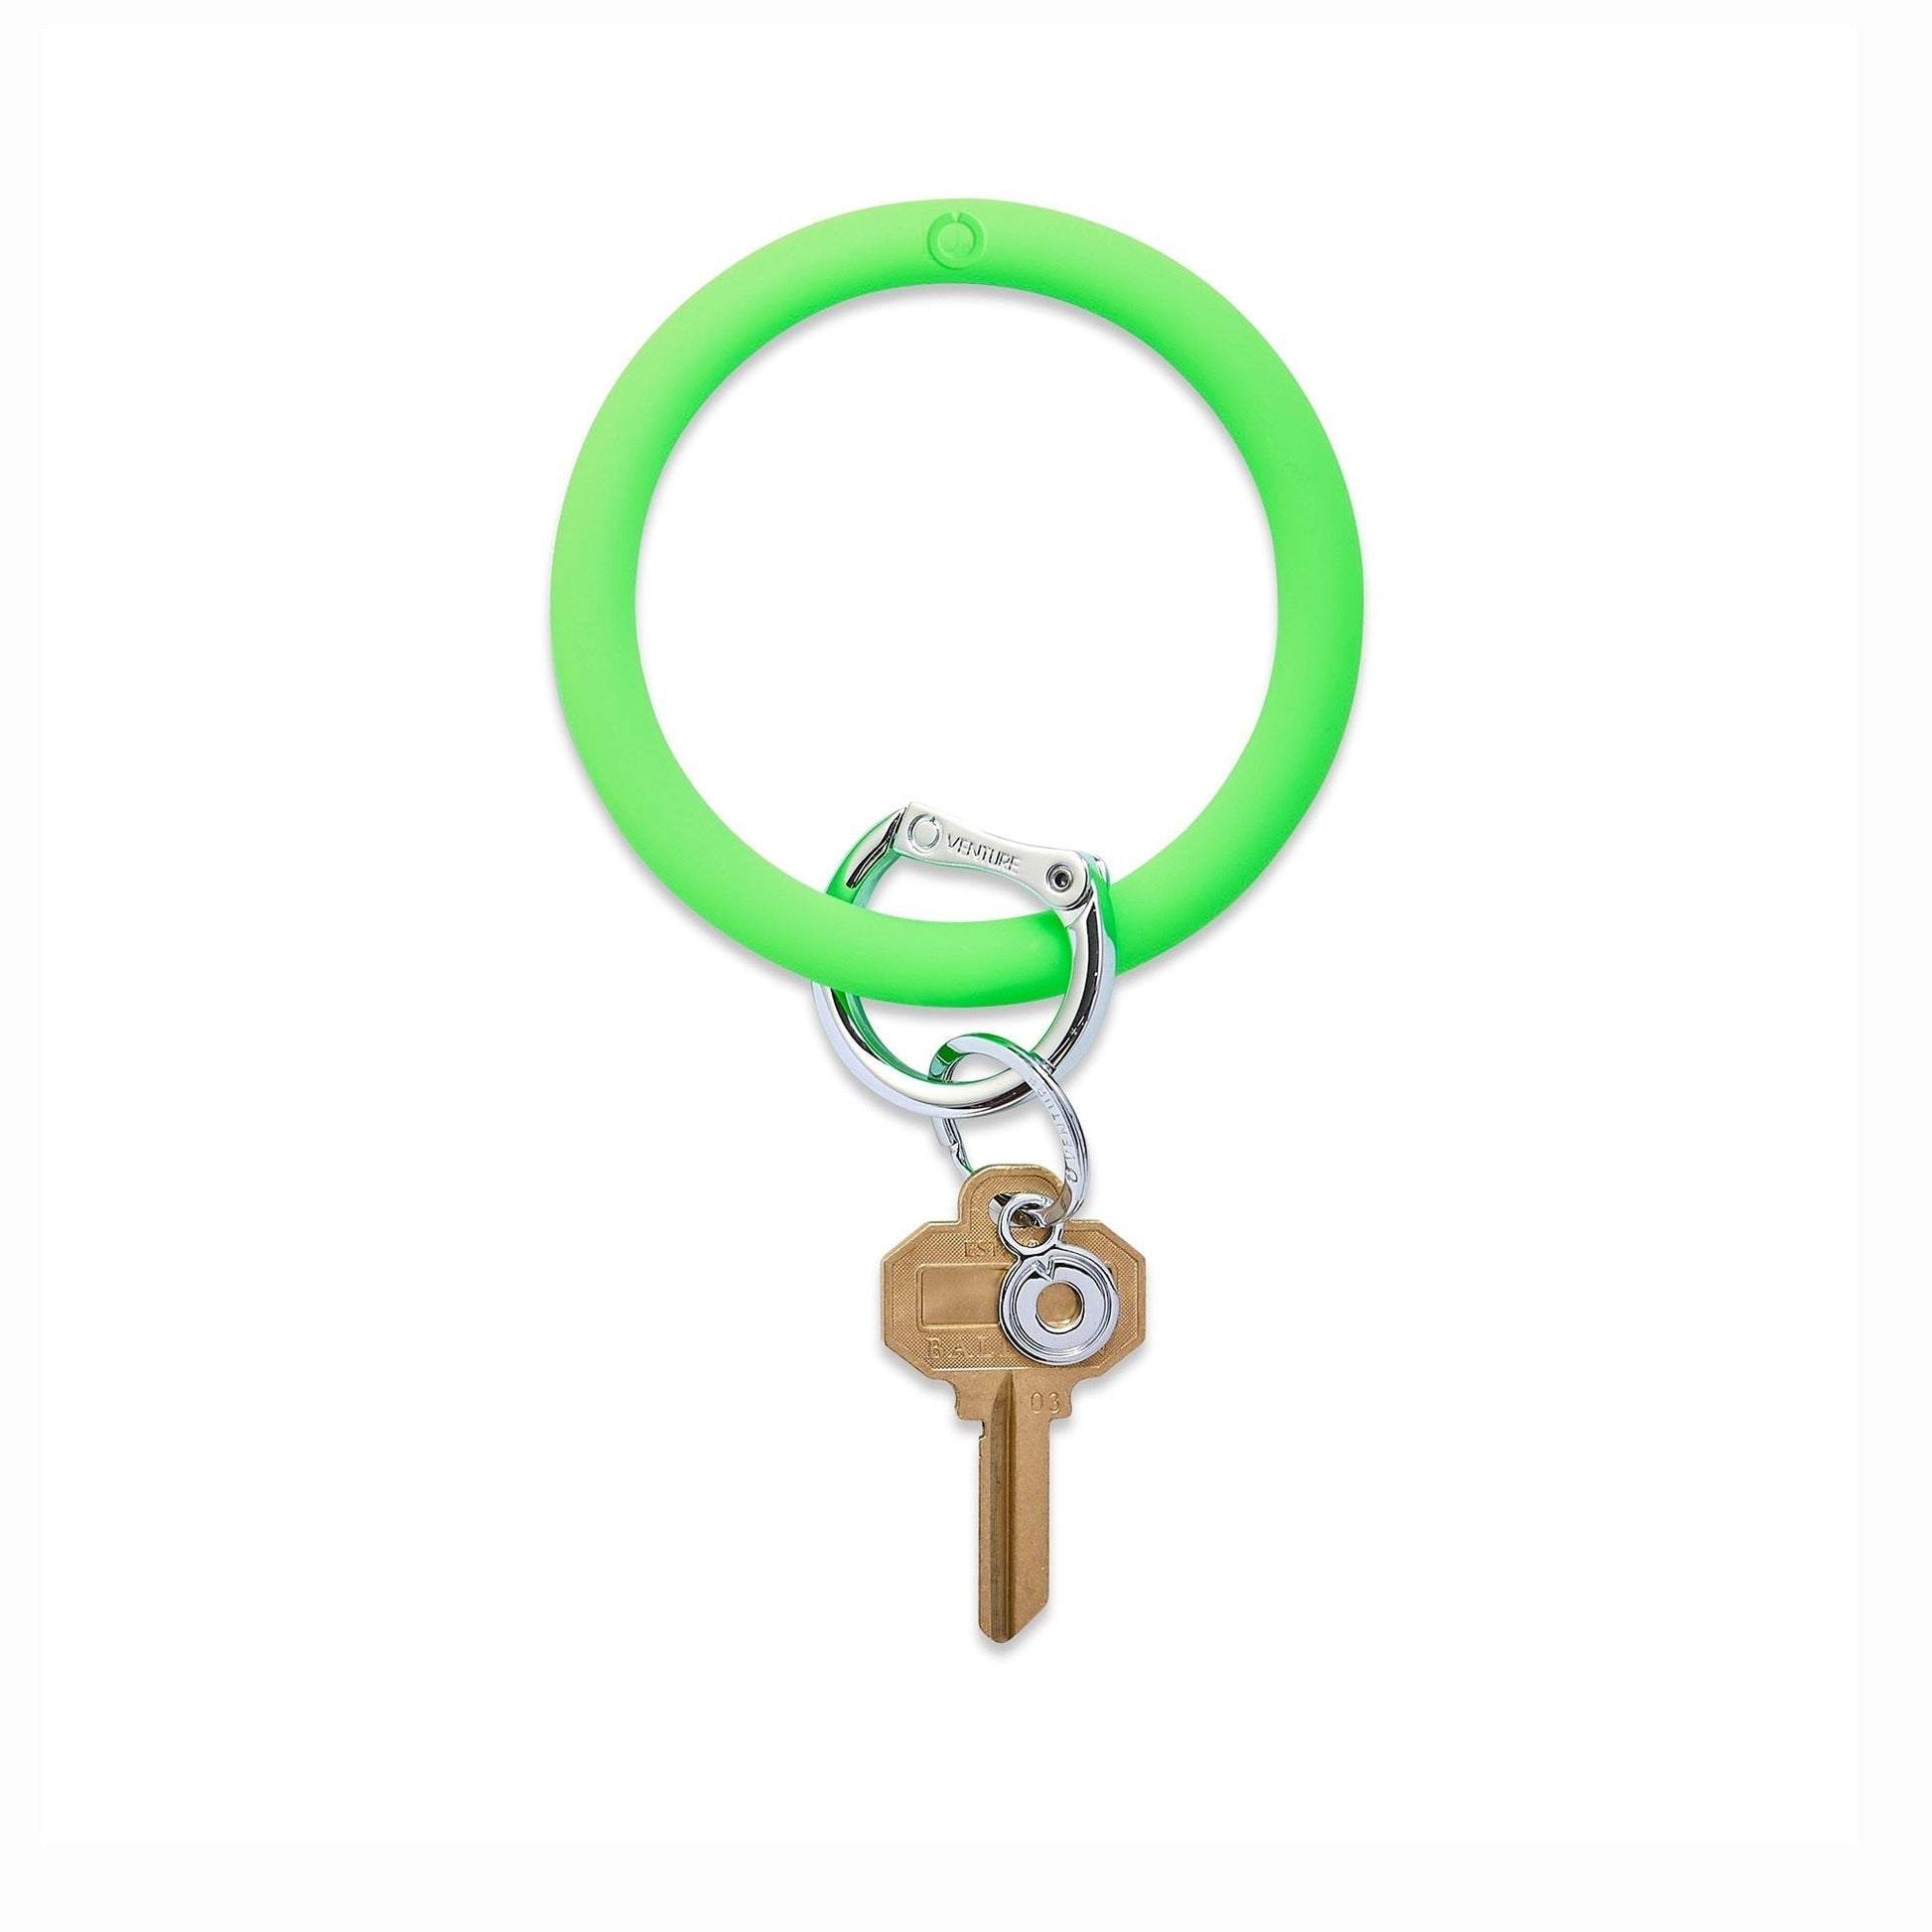 In the Grass - Silicone Big O Key Ring - Oventure